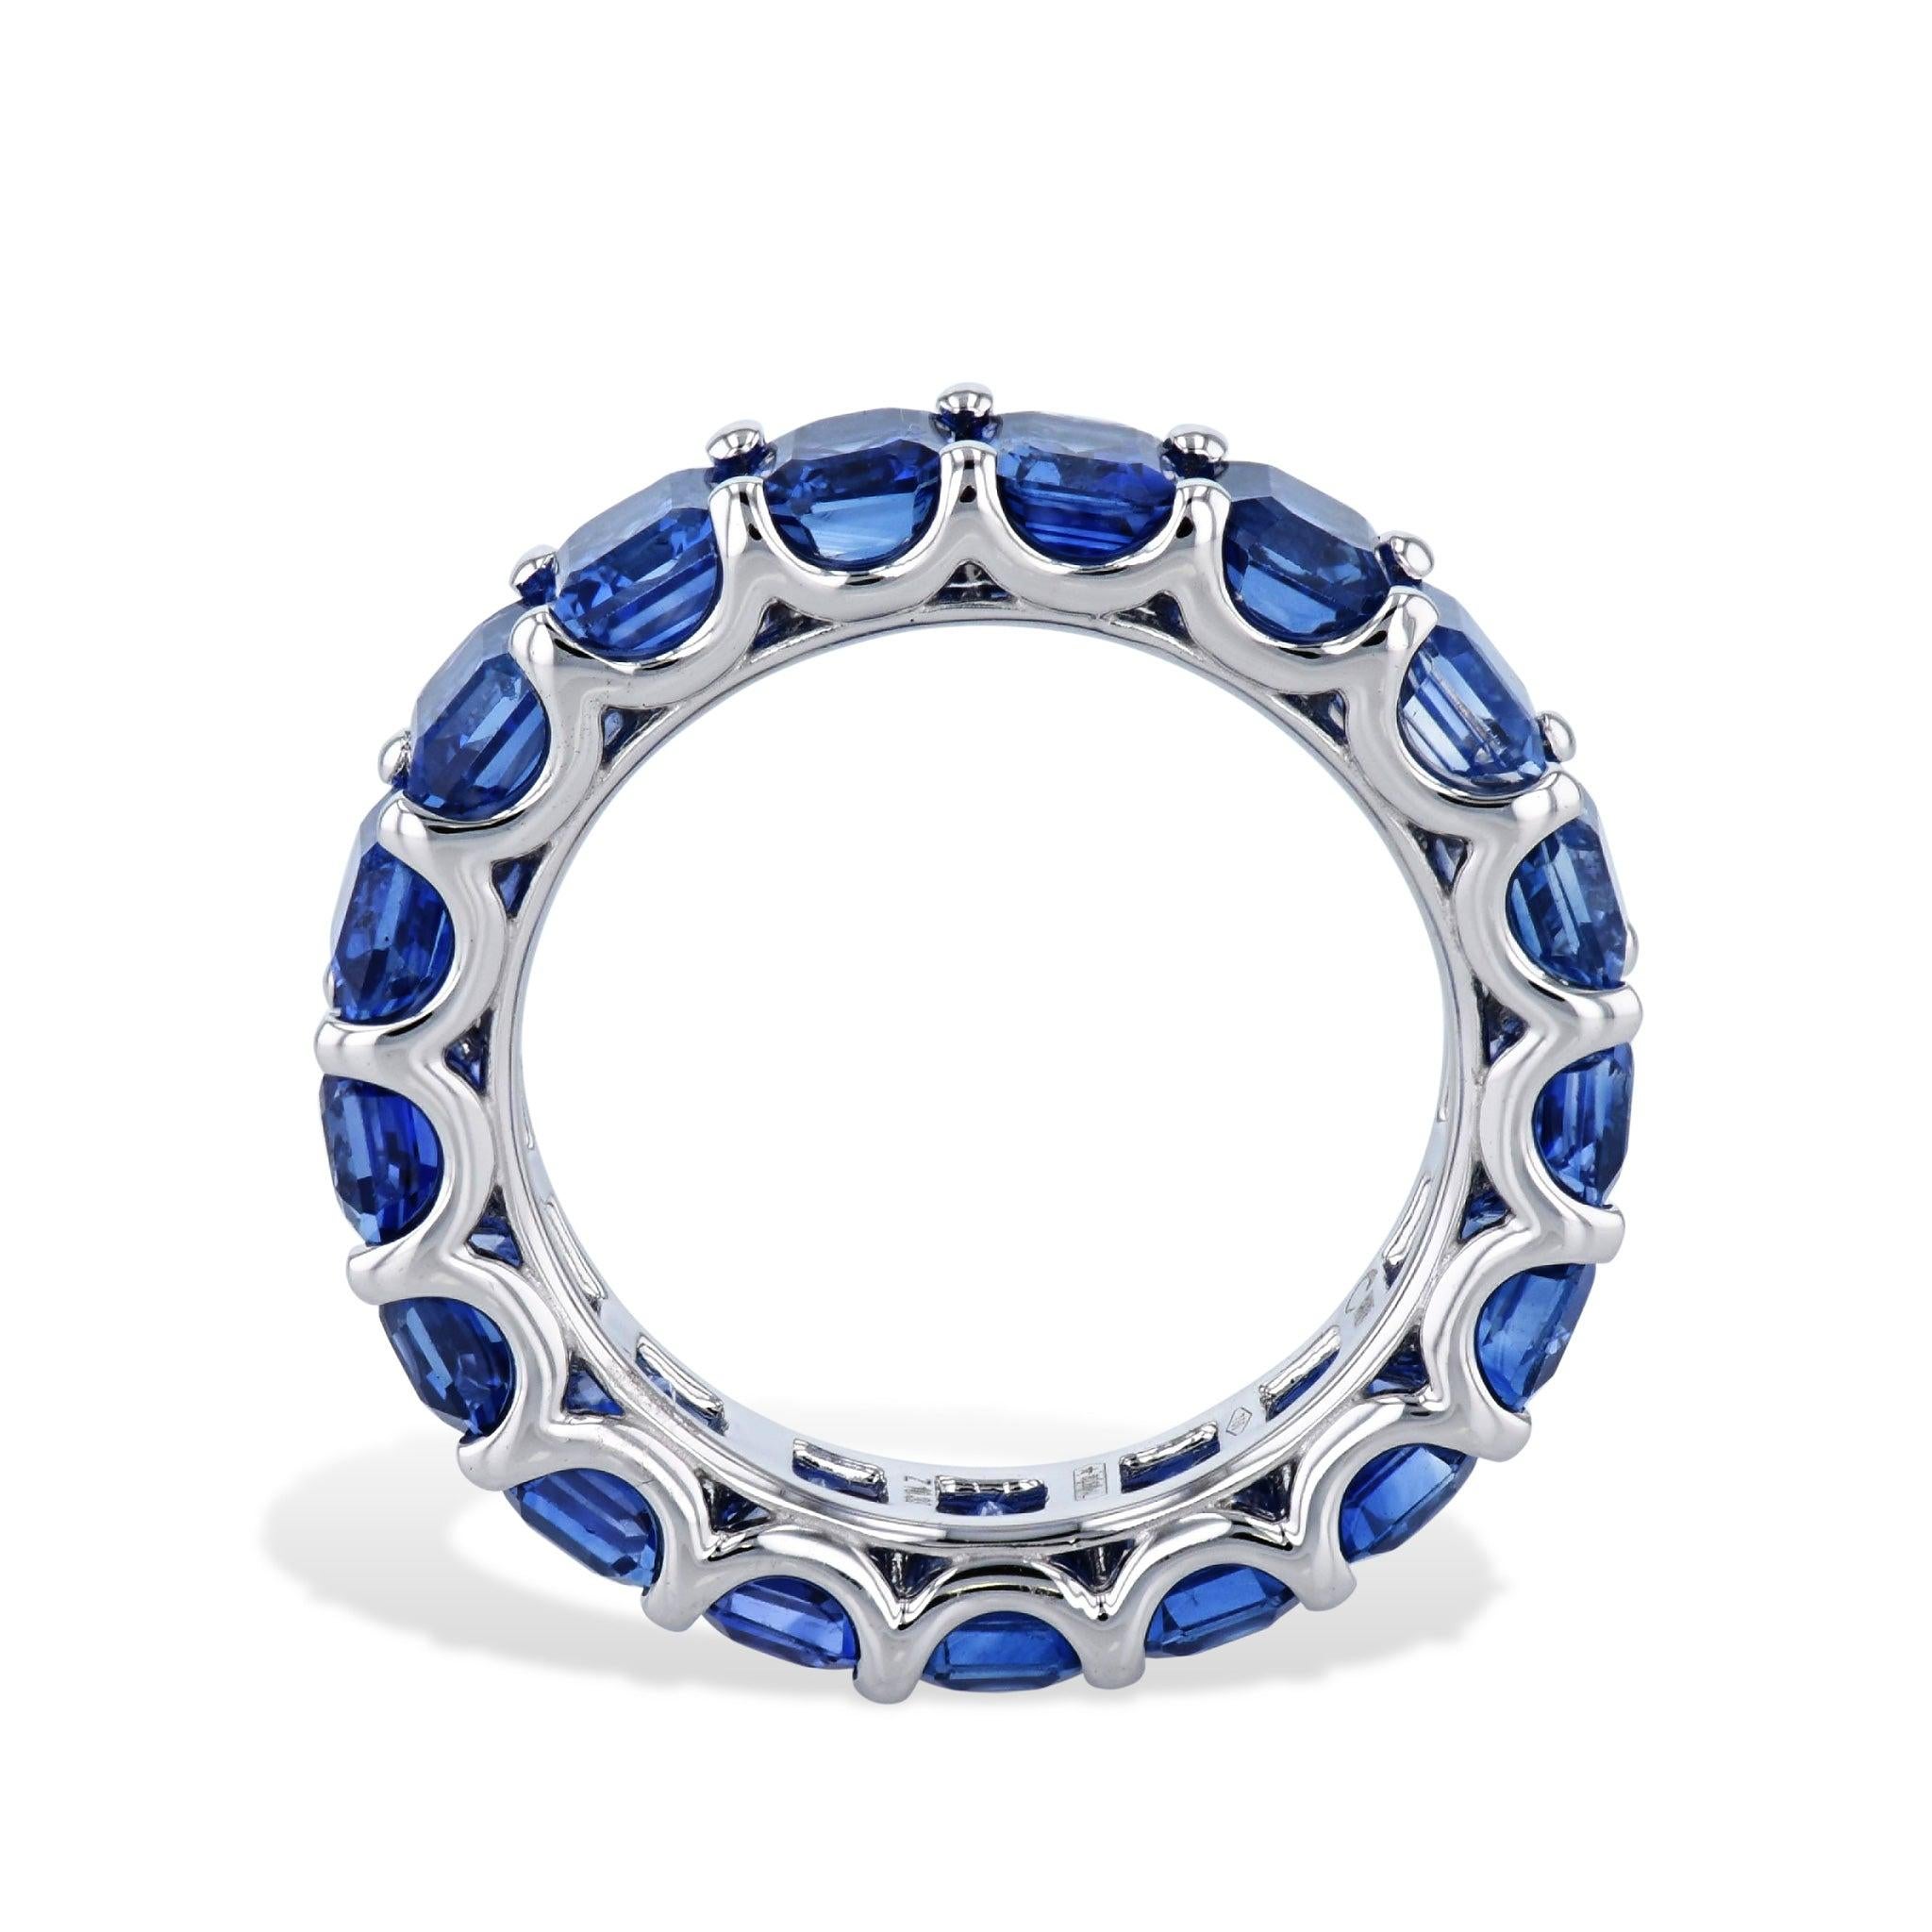 Vibrant blue sapphires light up this stunning eternity band with 18K white gold. 
Celebrate your special moments with this dazzling band. 

Size 6.5.
Sapphire White Gold Eternity Band.
Blue Sapphires:  10.33ct TW.
18kt. White Gold.
Eternity band. 
